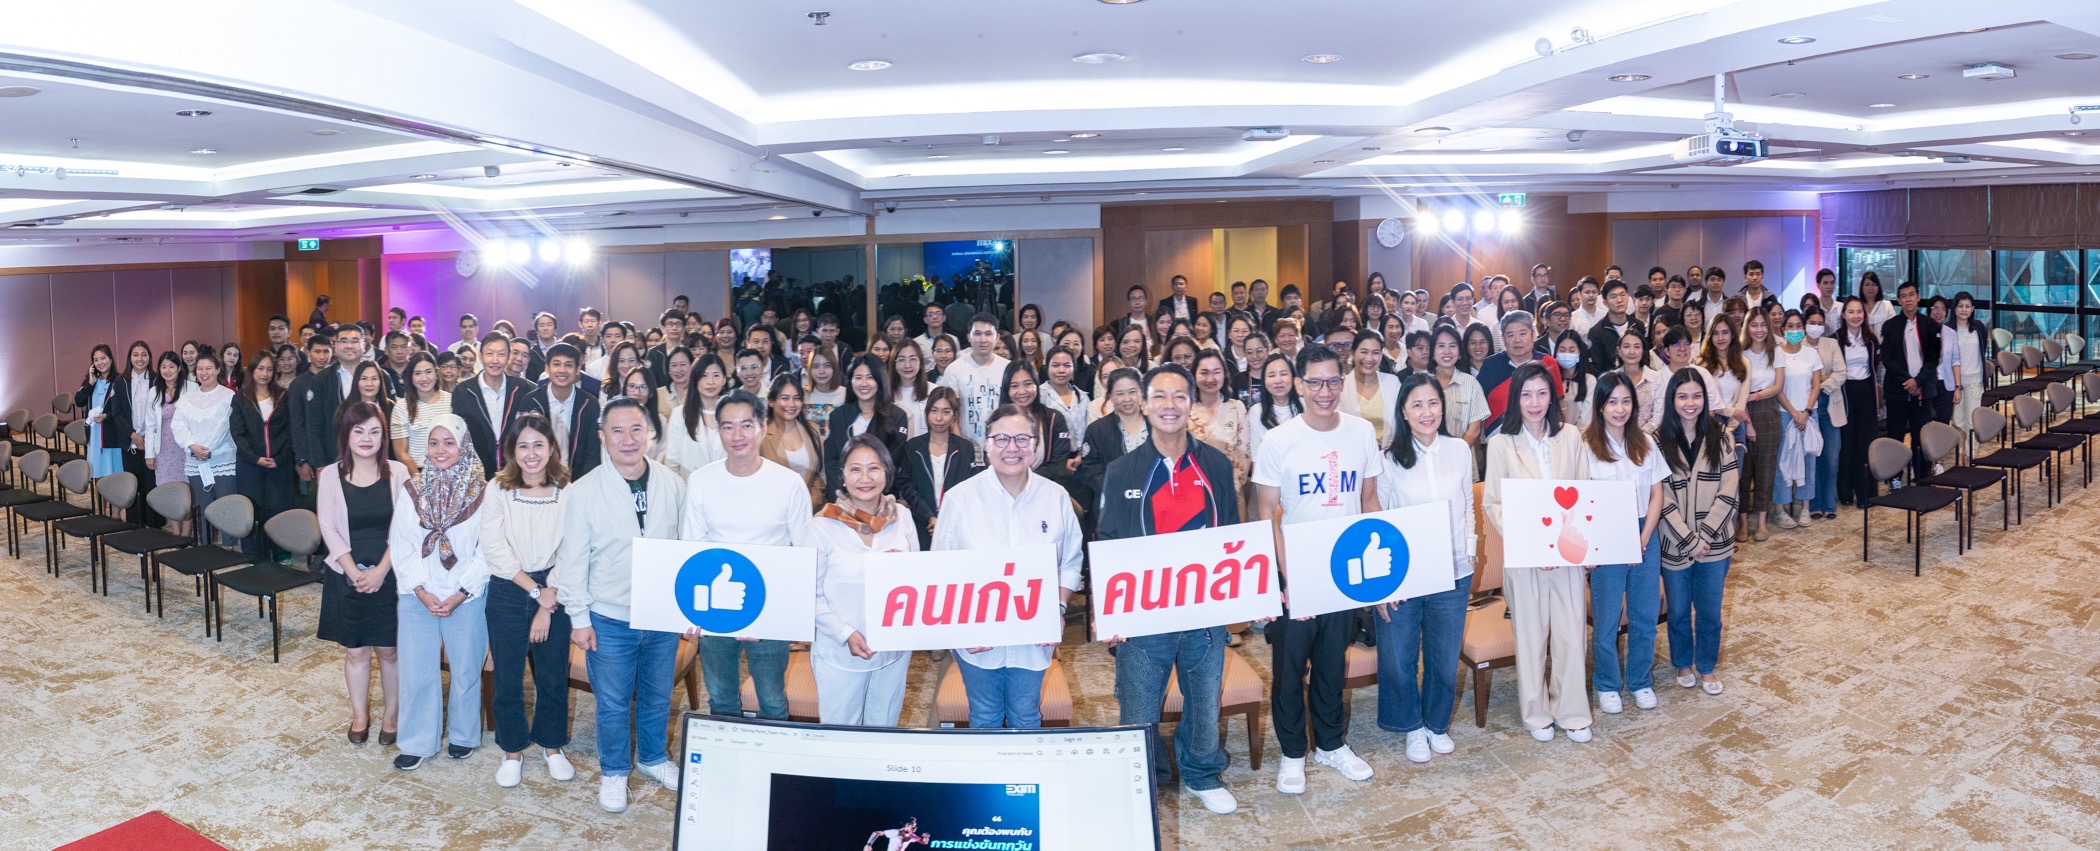 EXIM Thailand Upholds a Policy to Promote Human Rights and Care for Stakeholders at All Levels, Driving Organizational and National Sustainable Development in Town Hall Meeting